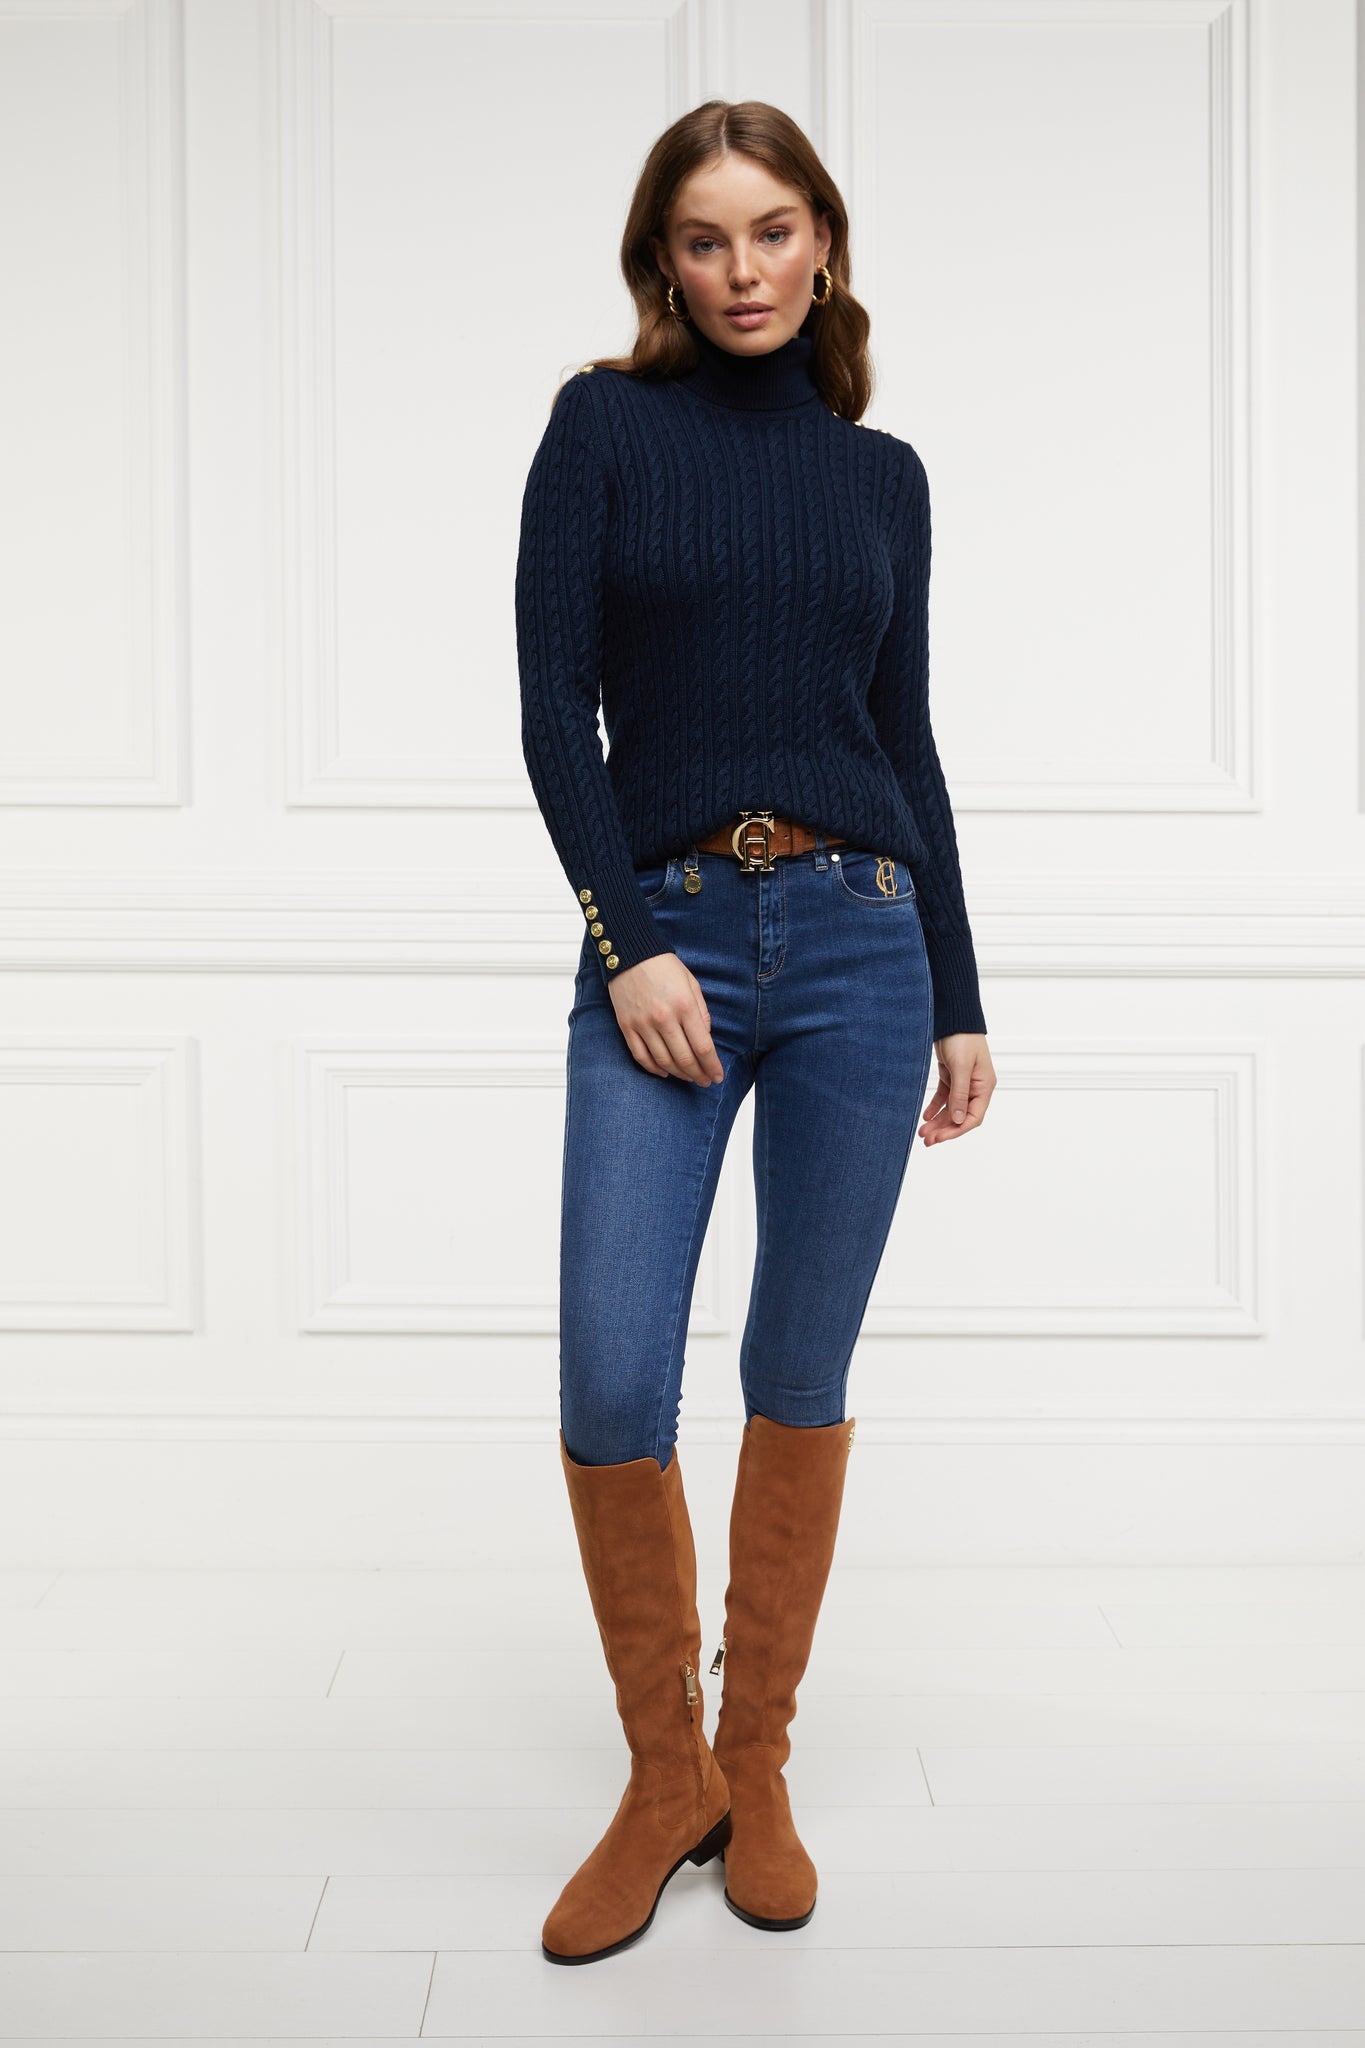 womens cable knit jumper in navy with ribbed roll neck cuffs and hem